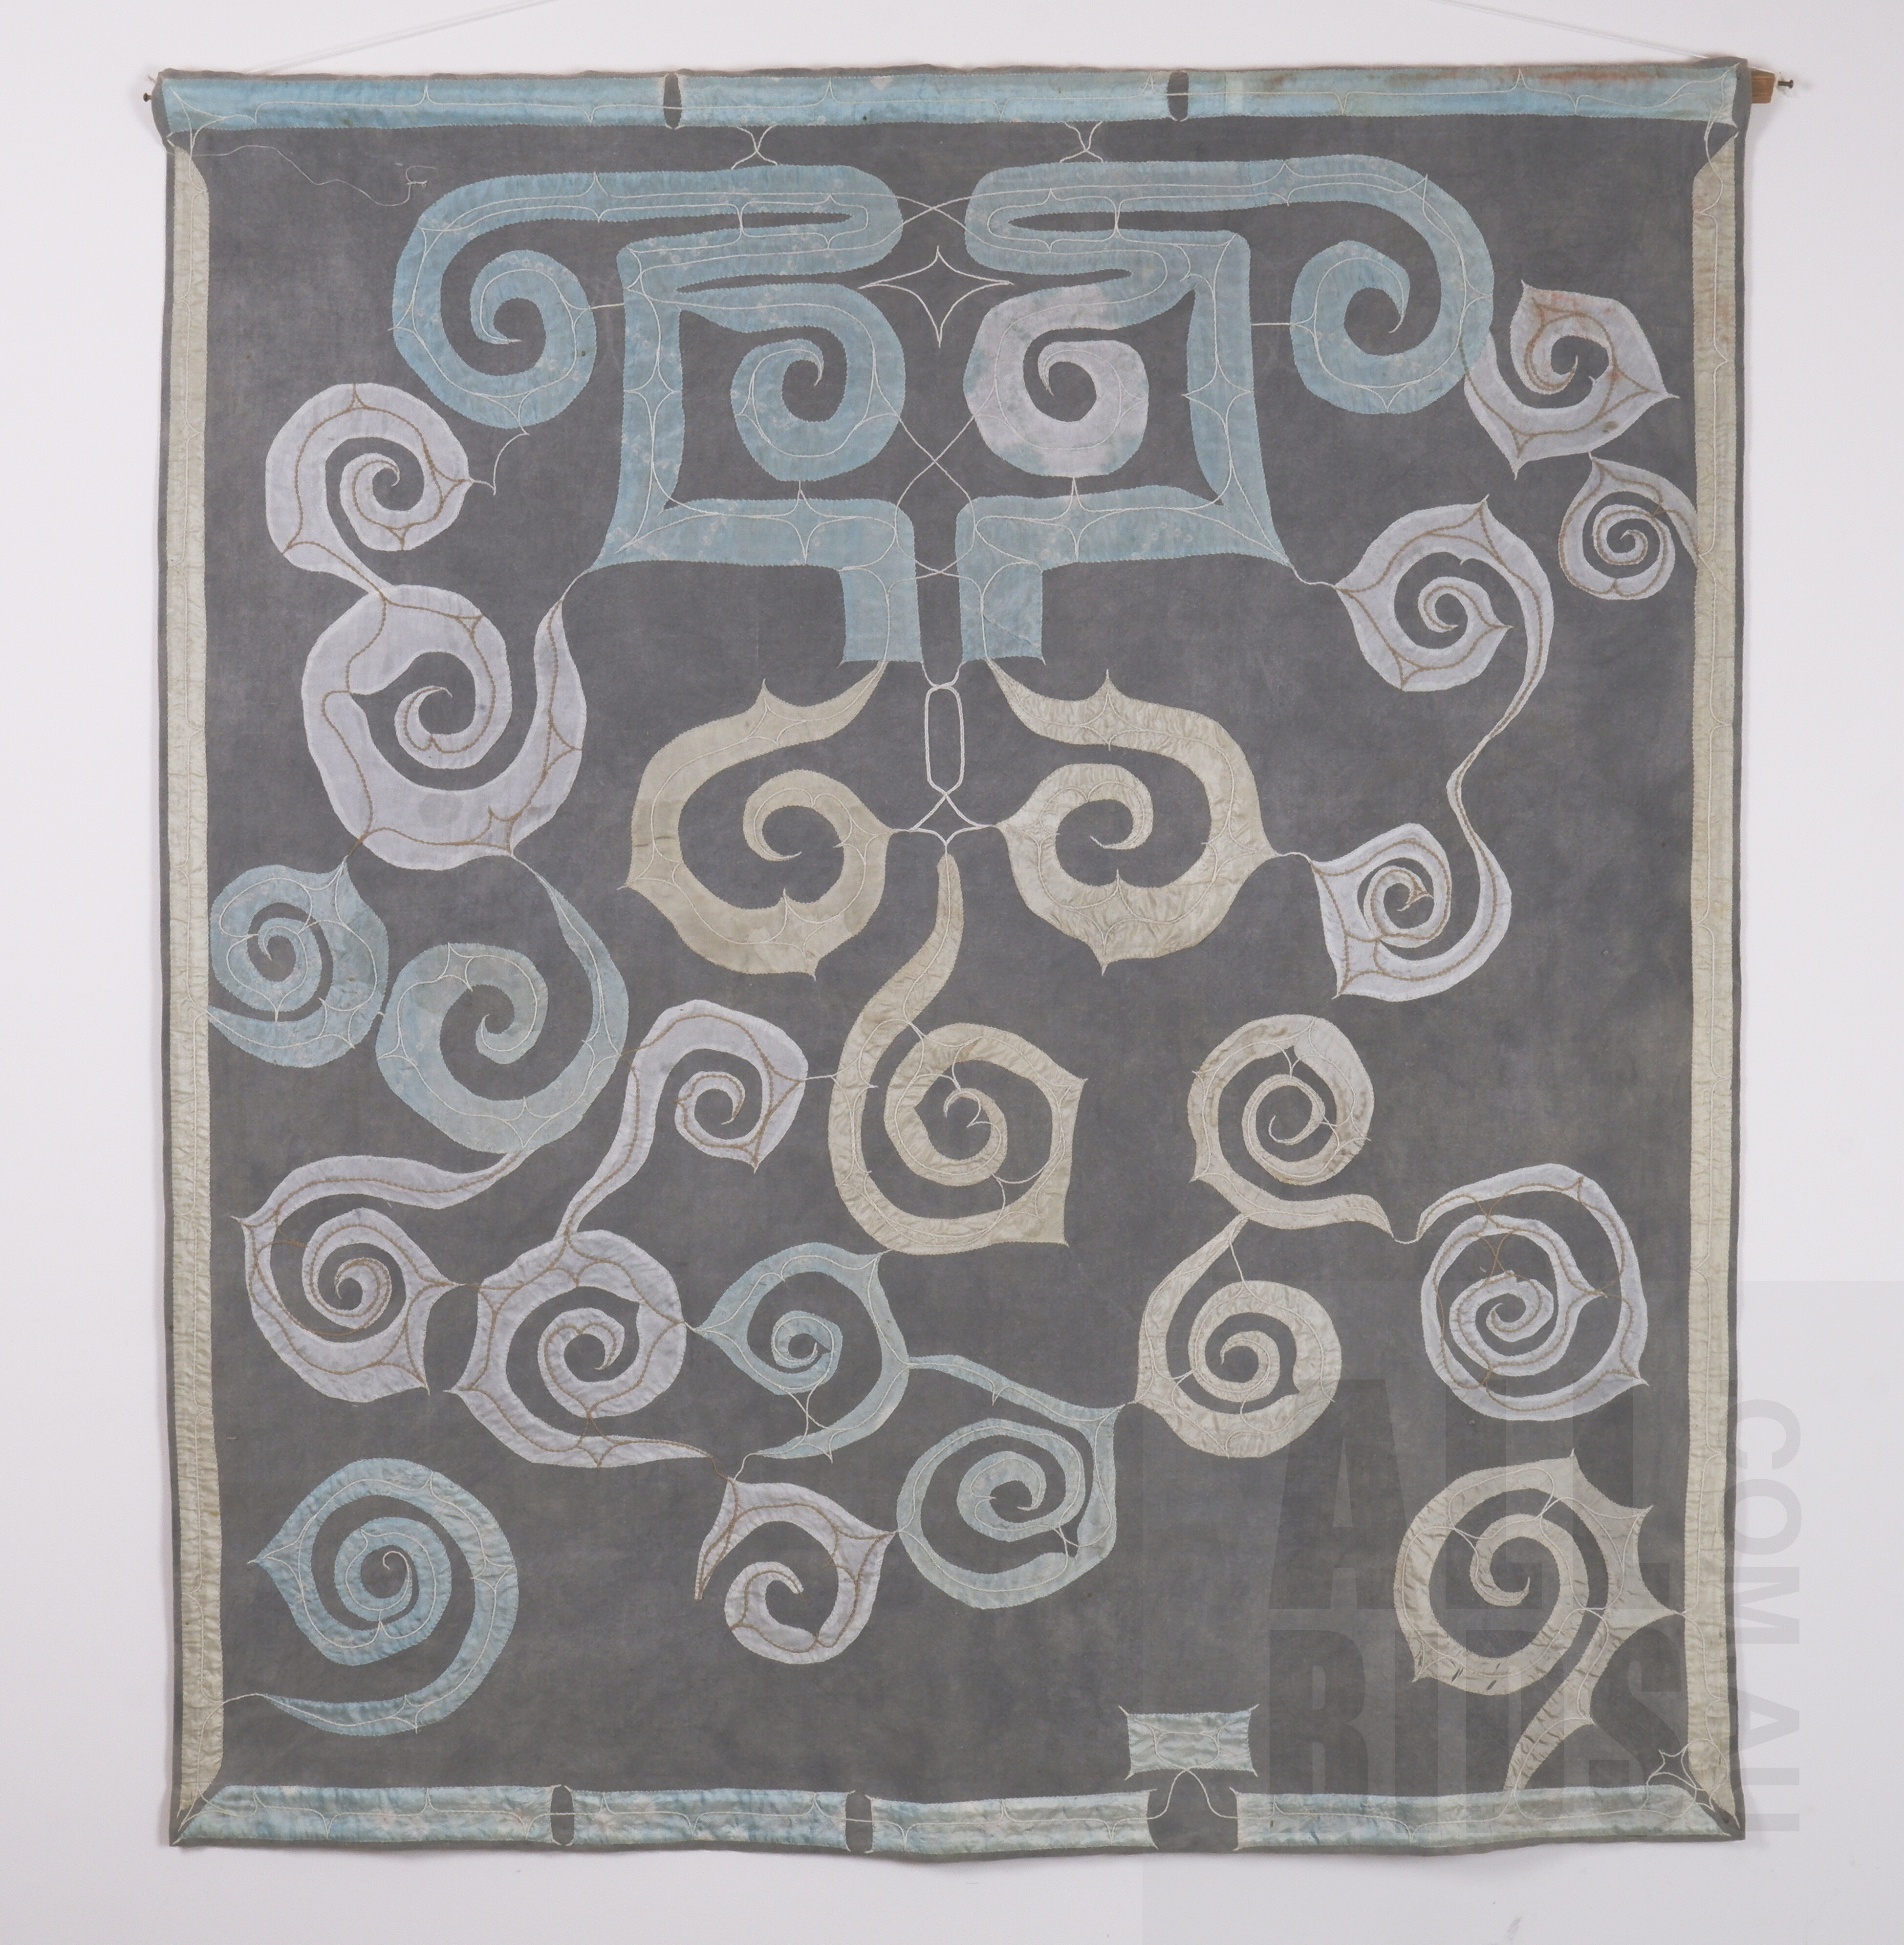 'A Hand-Dyed Traditional Japanese Ainu Cotton and Silk Embroidered Wall Hanging, 104 x 93 cm'